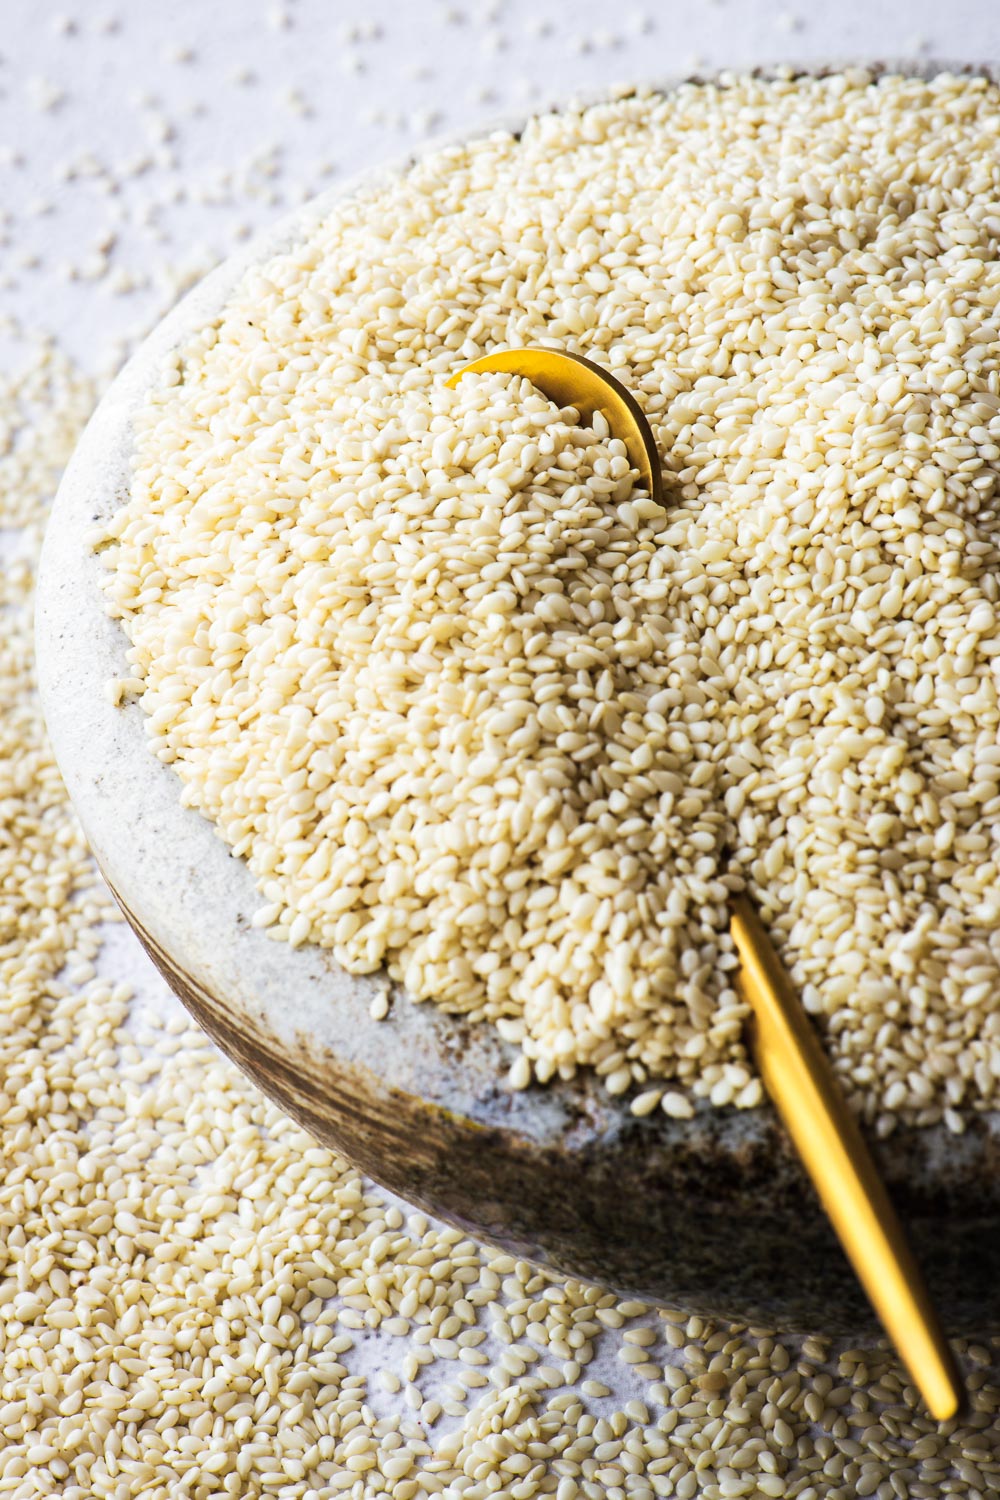 Close-up of sesame seeds in ceramic bowl with a small gold spoon.